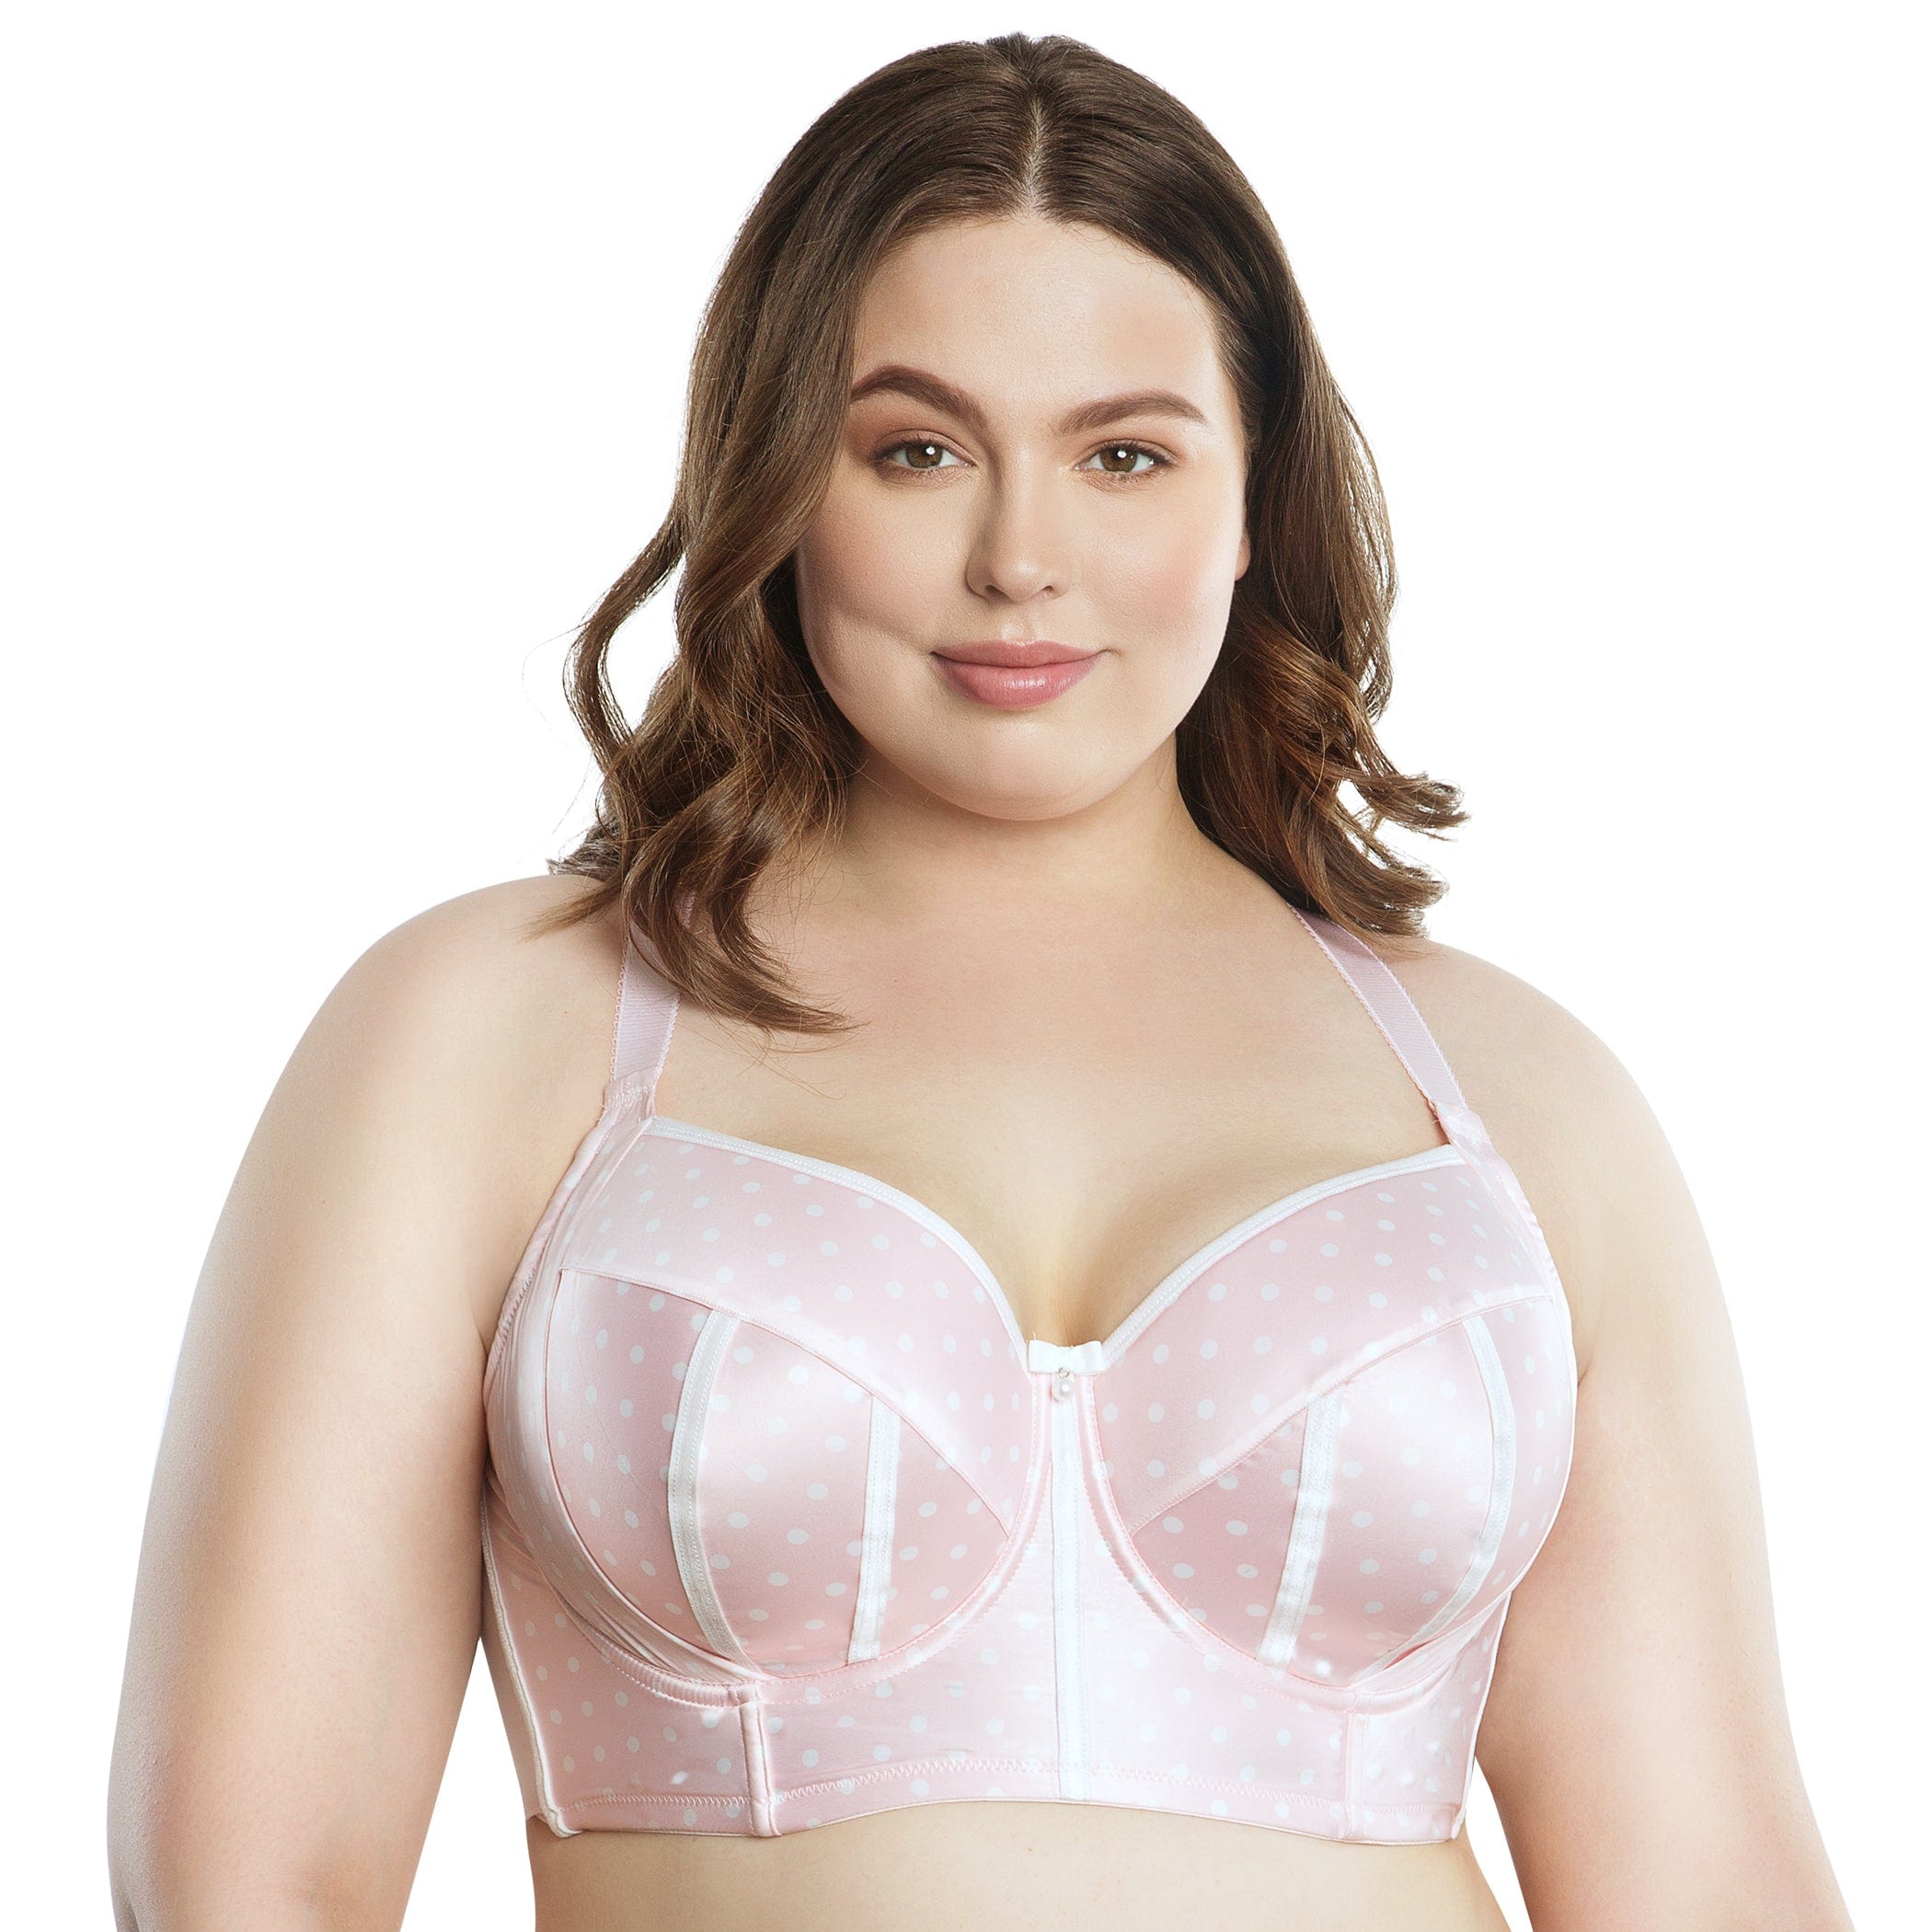 What Are Padded Bras? - ParfaitLingerie.com - Blog